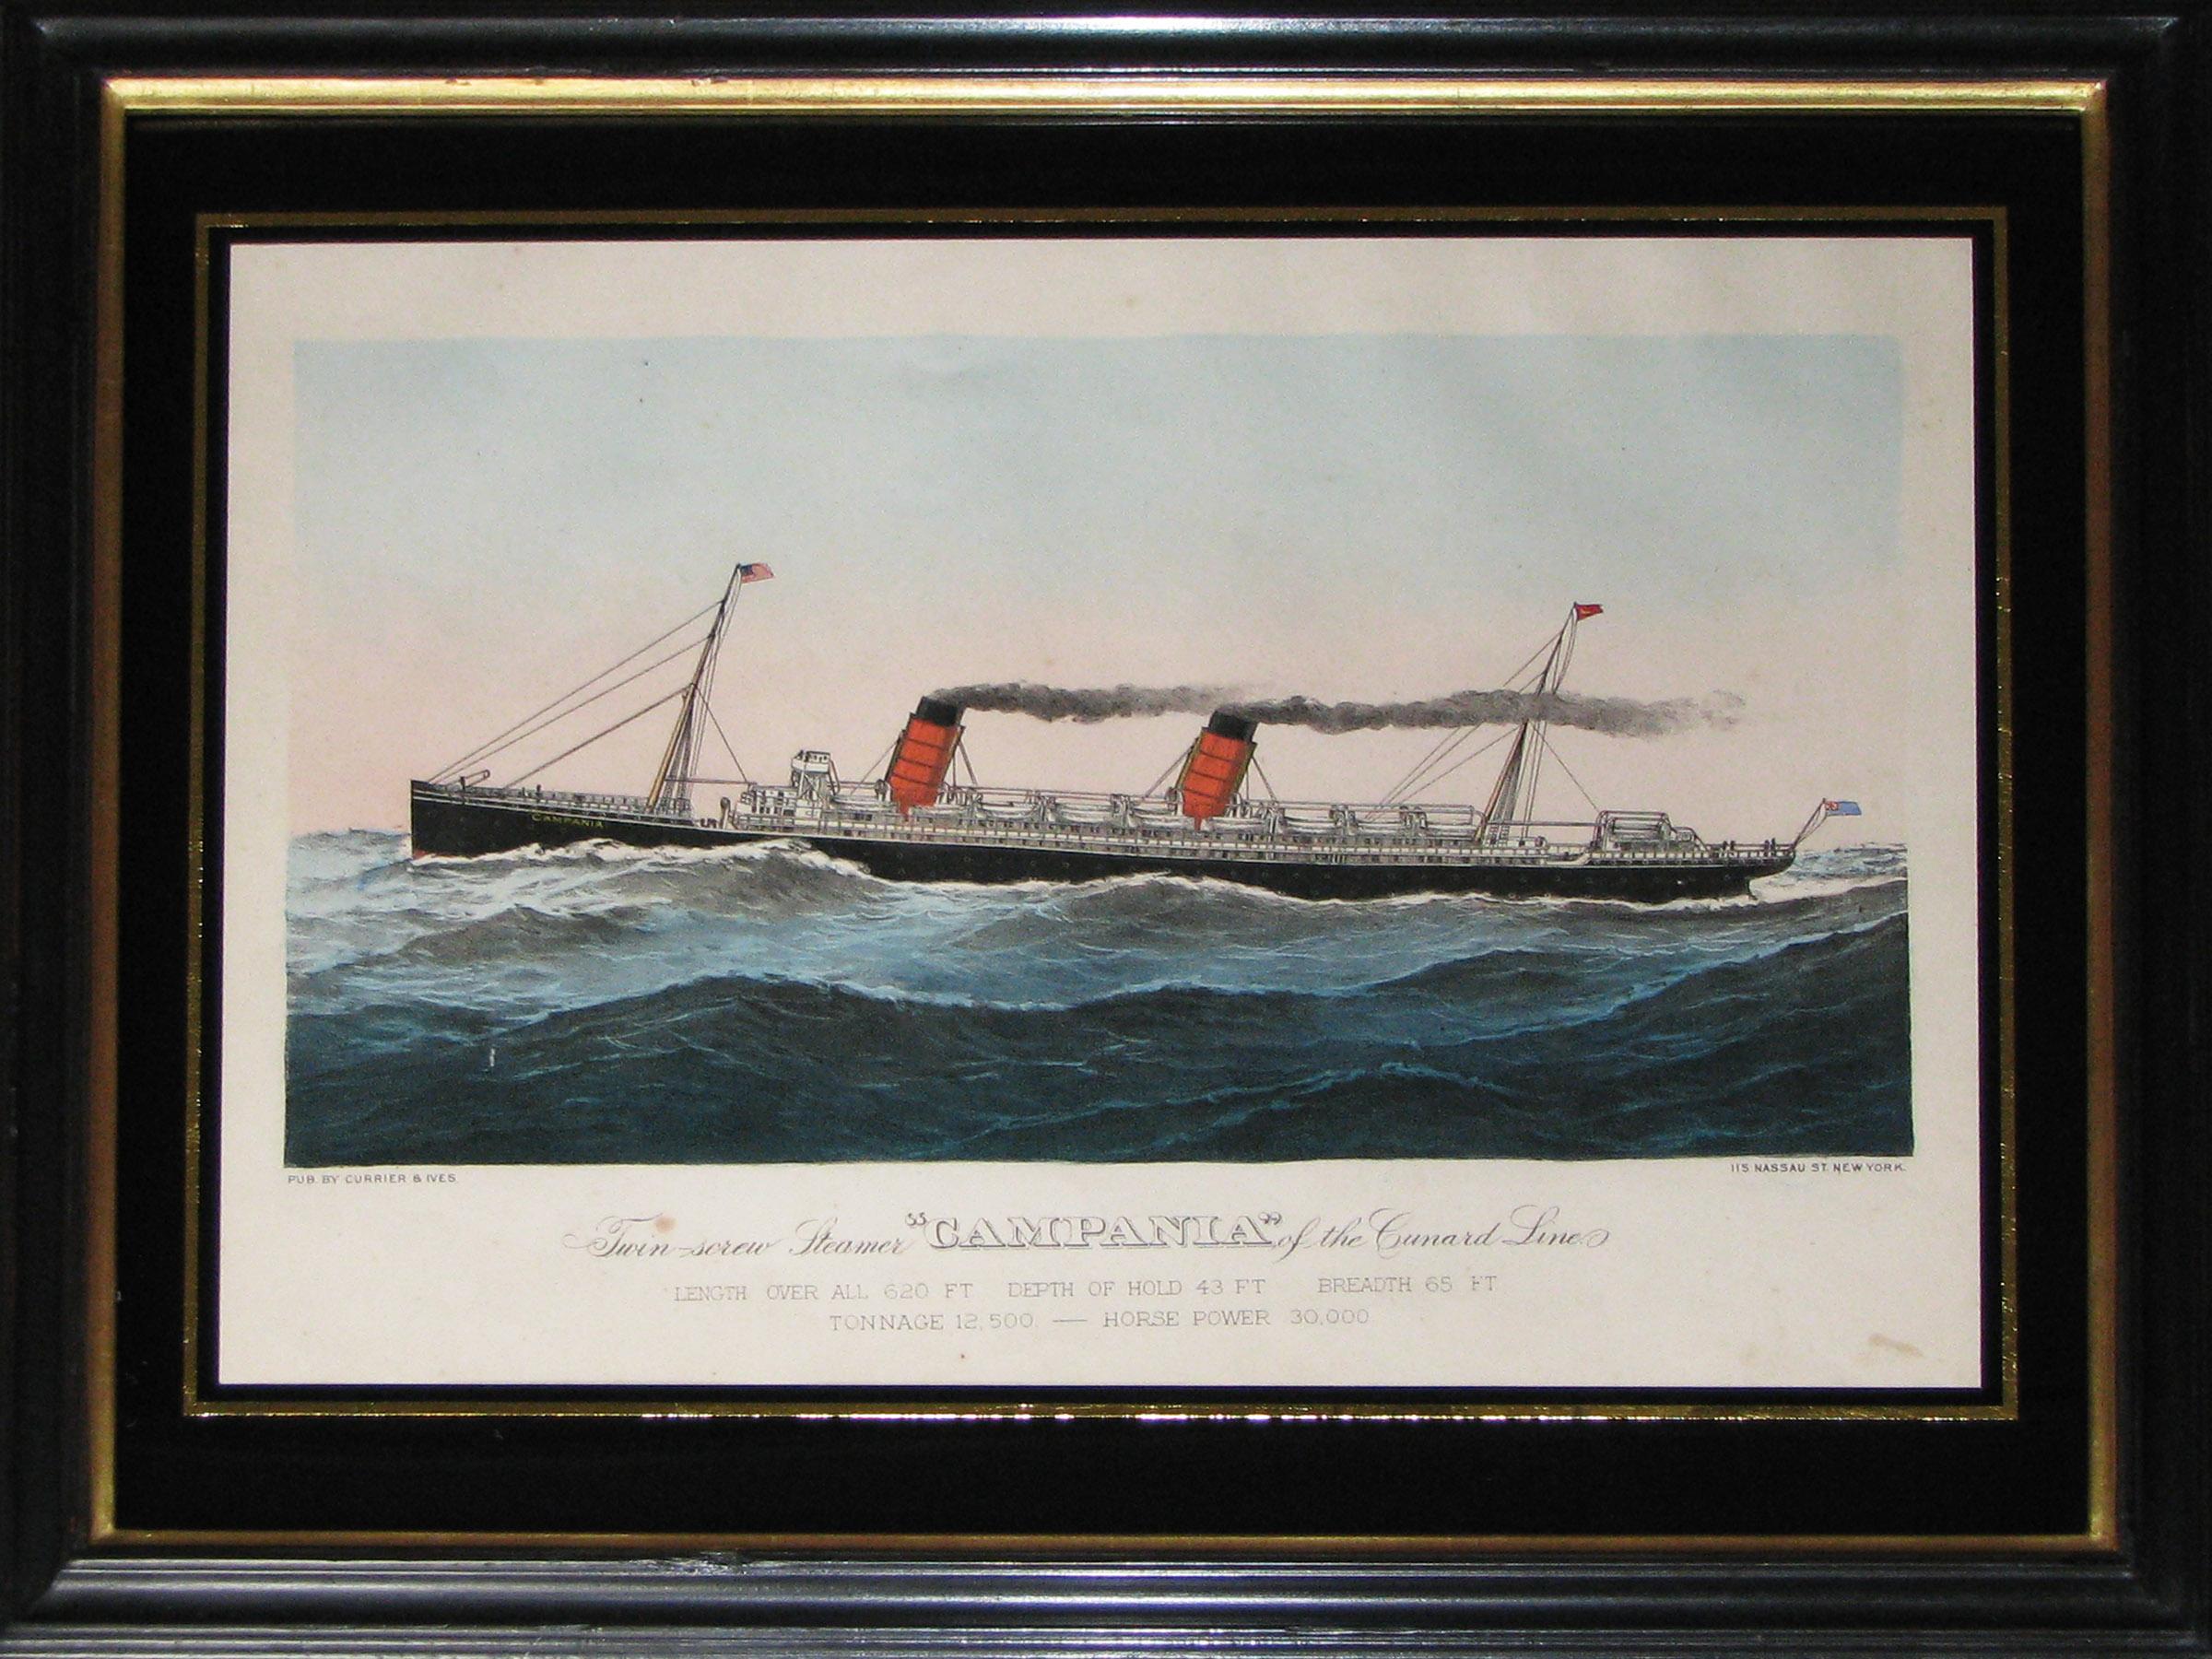 A wonderful set of 9 maritime lithograph prints of Trans-Atlantic steamships in original hand colour; published by Currier and Ives in New York 1880s and 1890s. These images evoke all the excitement and majesty of trans-Atlantic steam travel in the